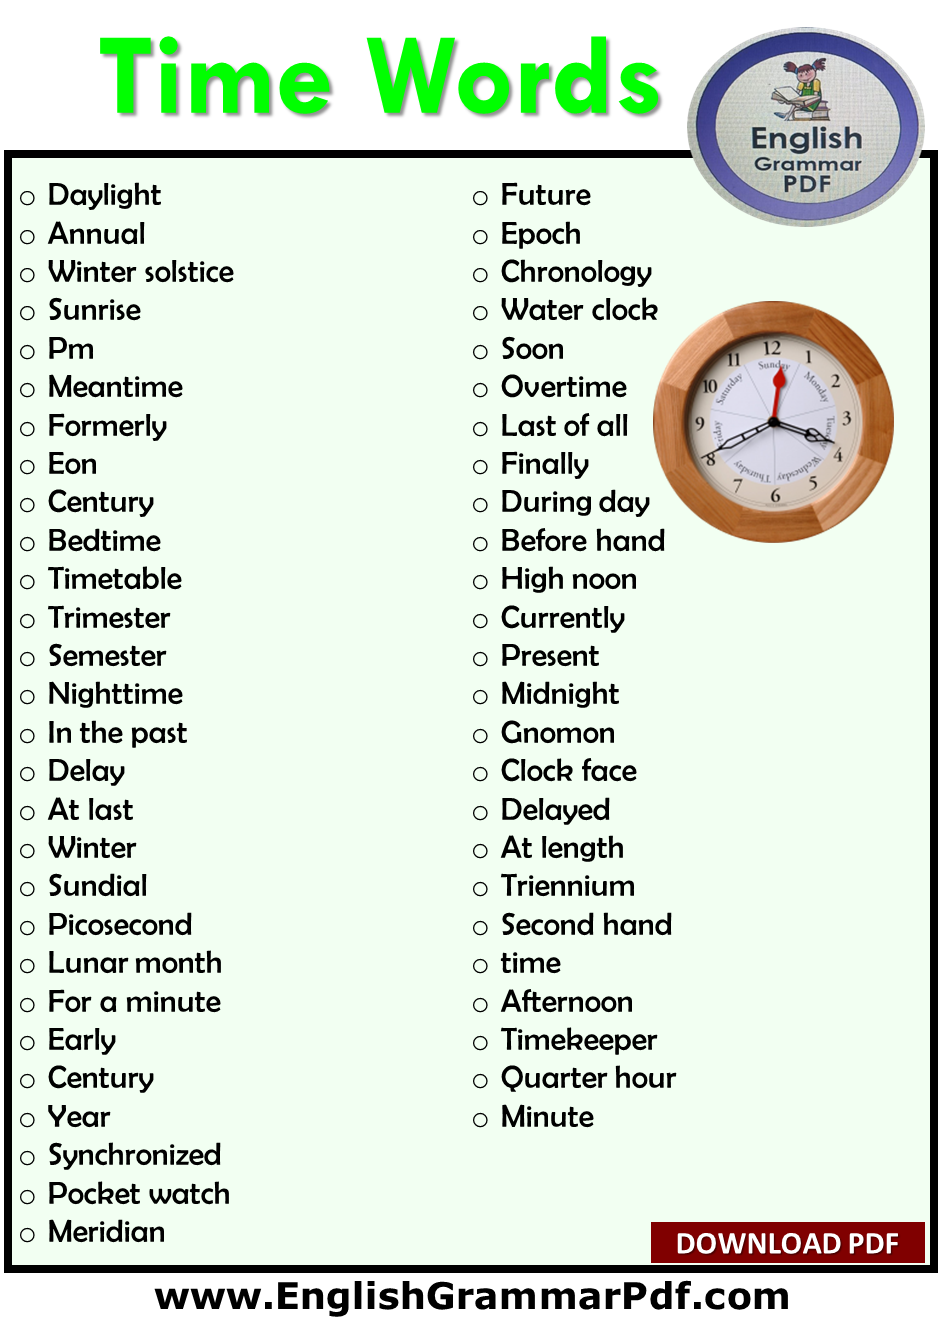 300 time words, time vocabulary words